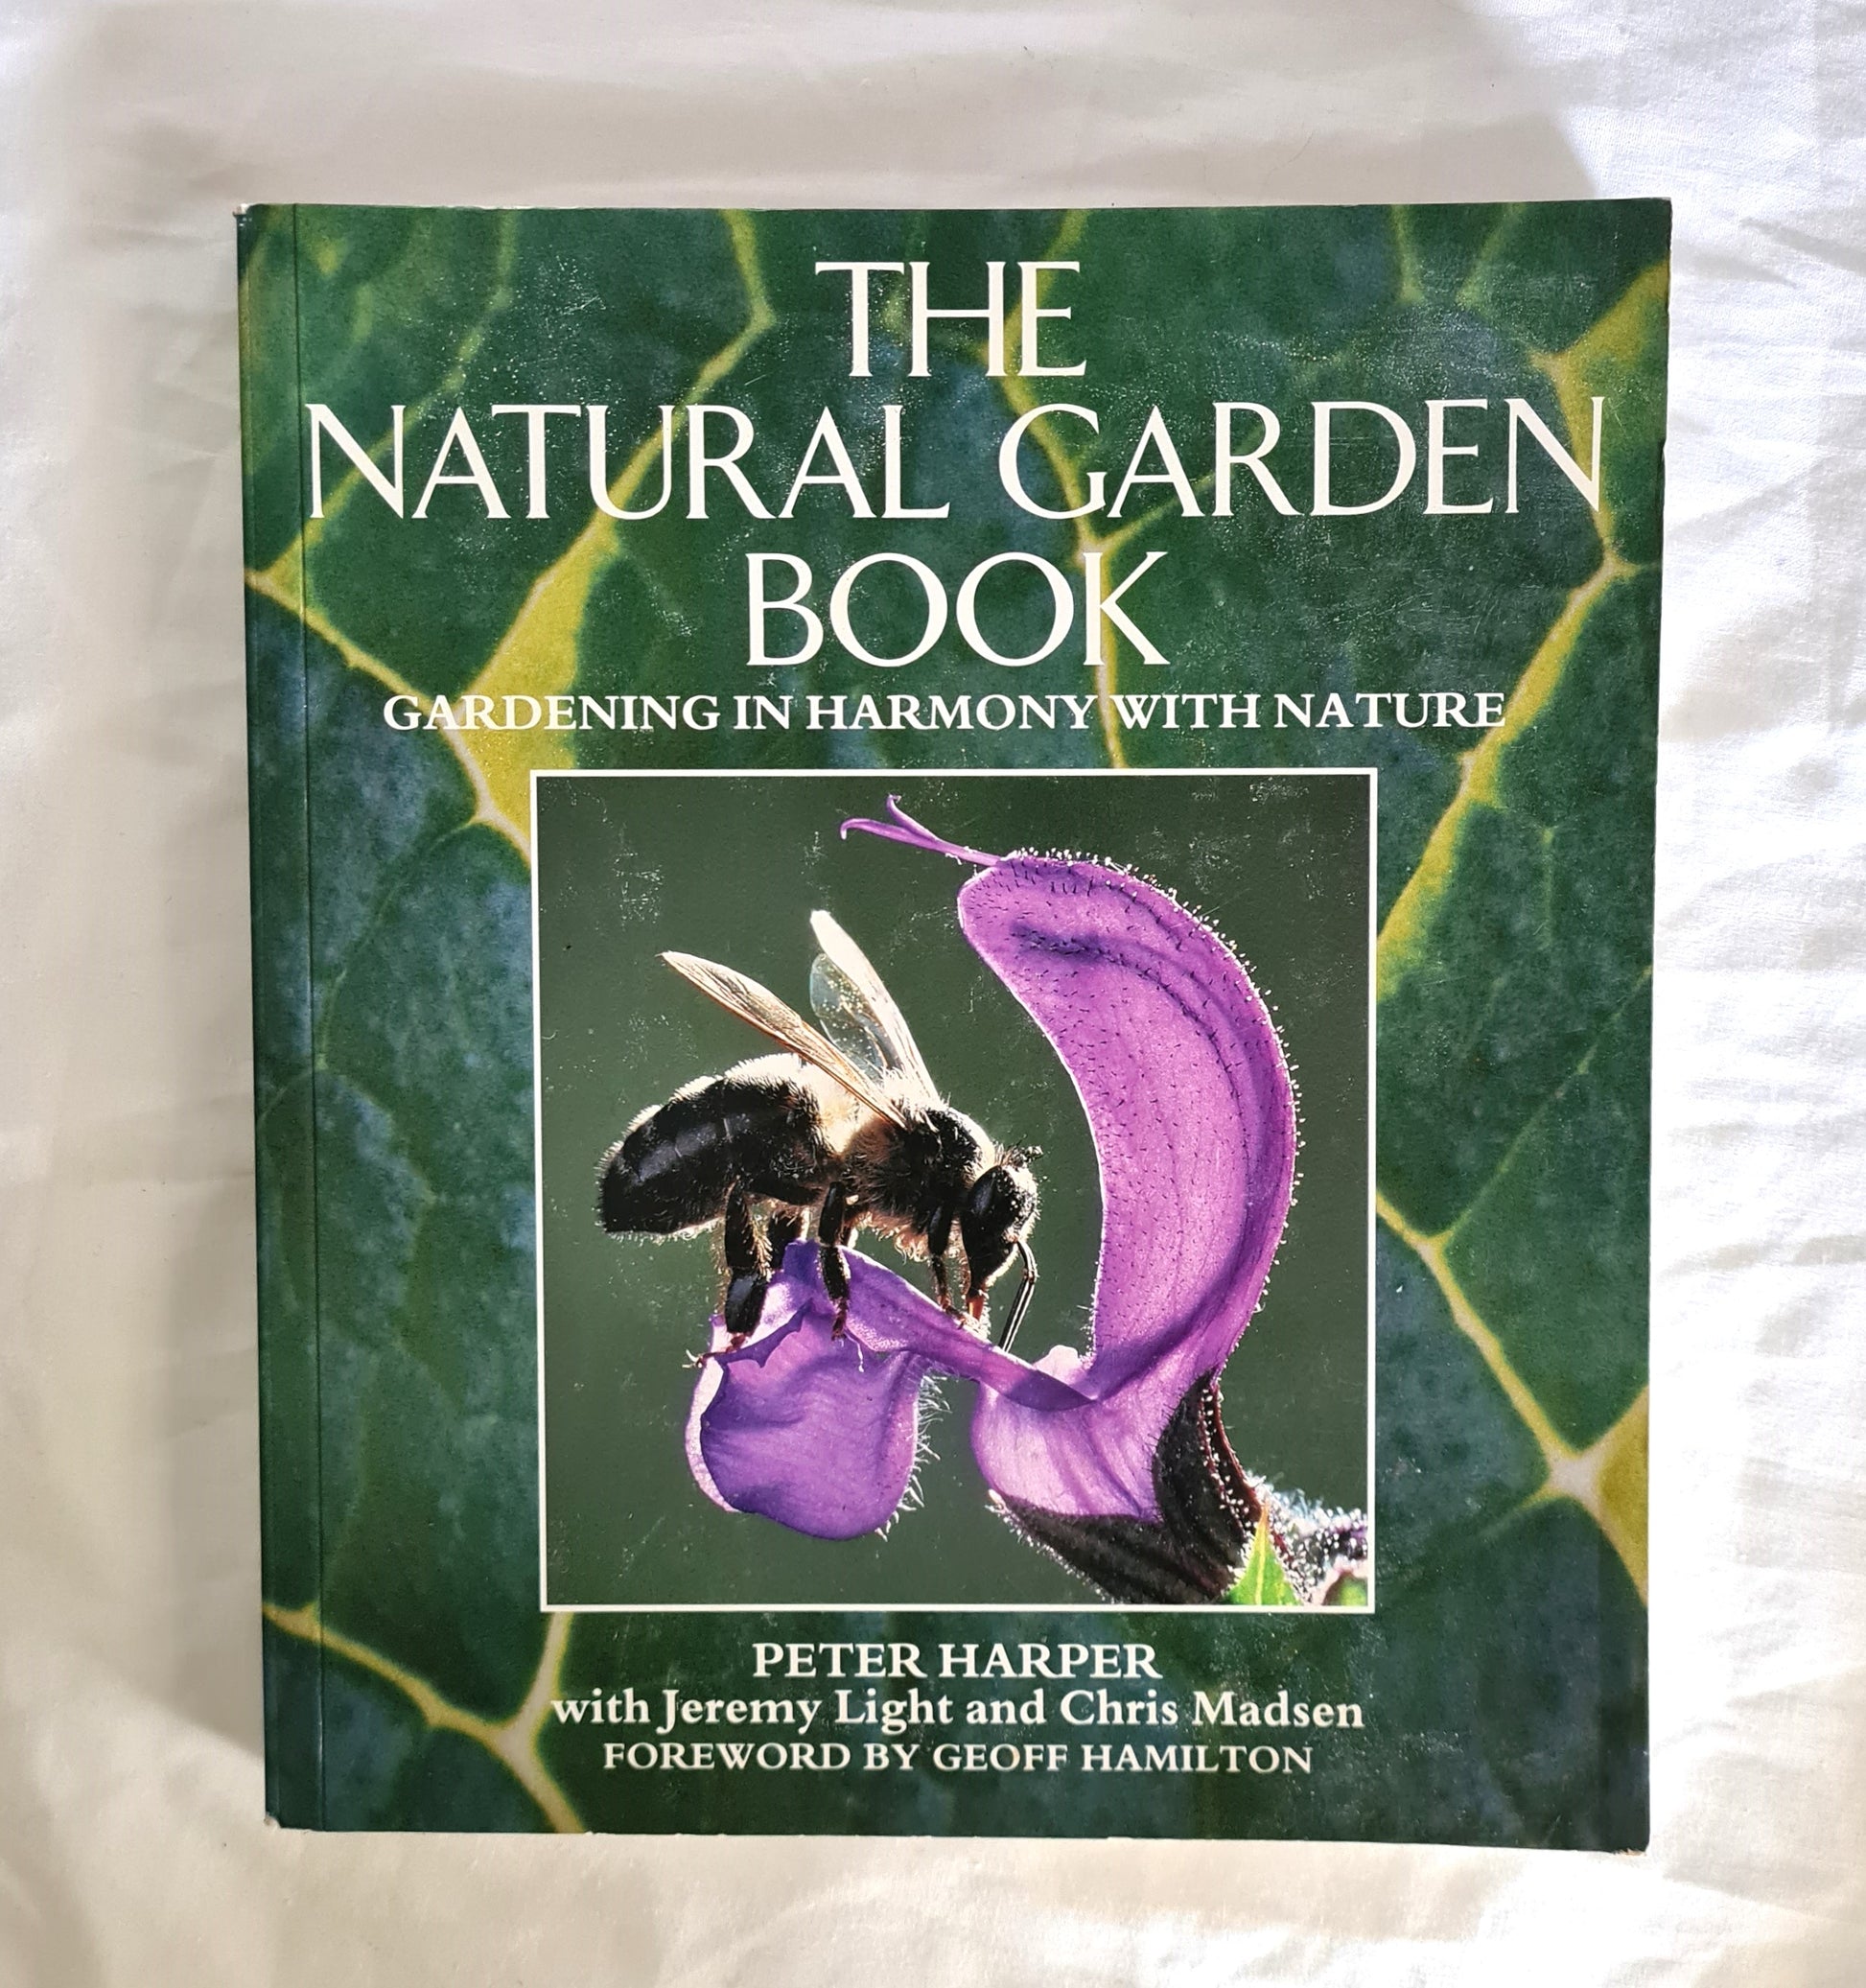 The Natural Garden Book  A holistic approach to gardening  by Peter Harper  with Jeremy Light and Chris Madsen